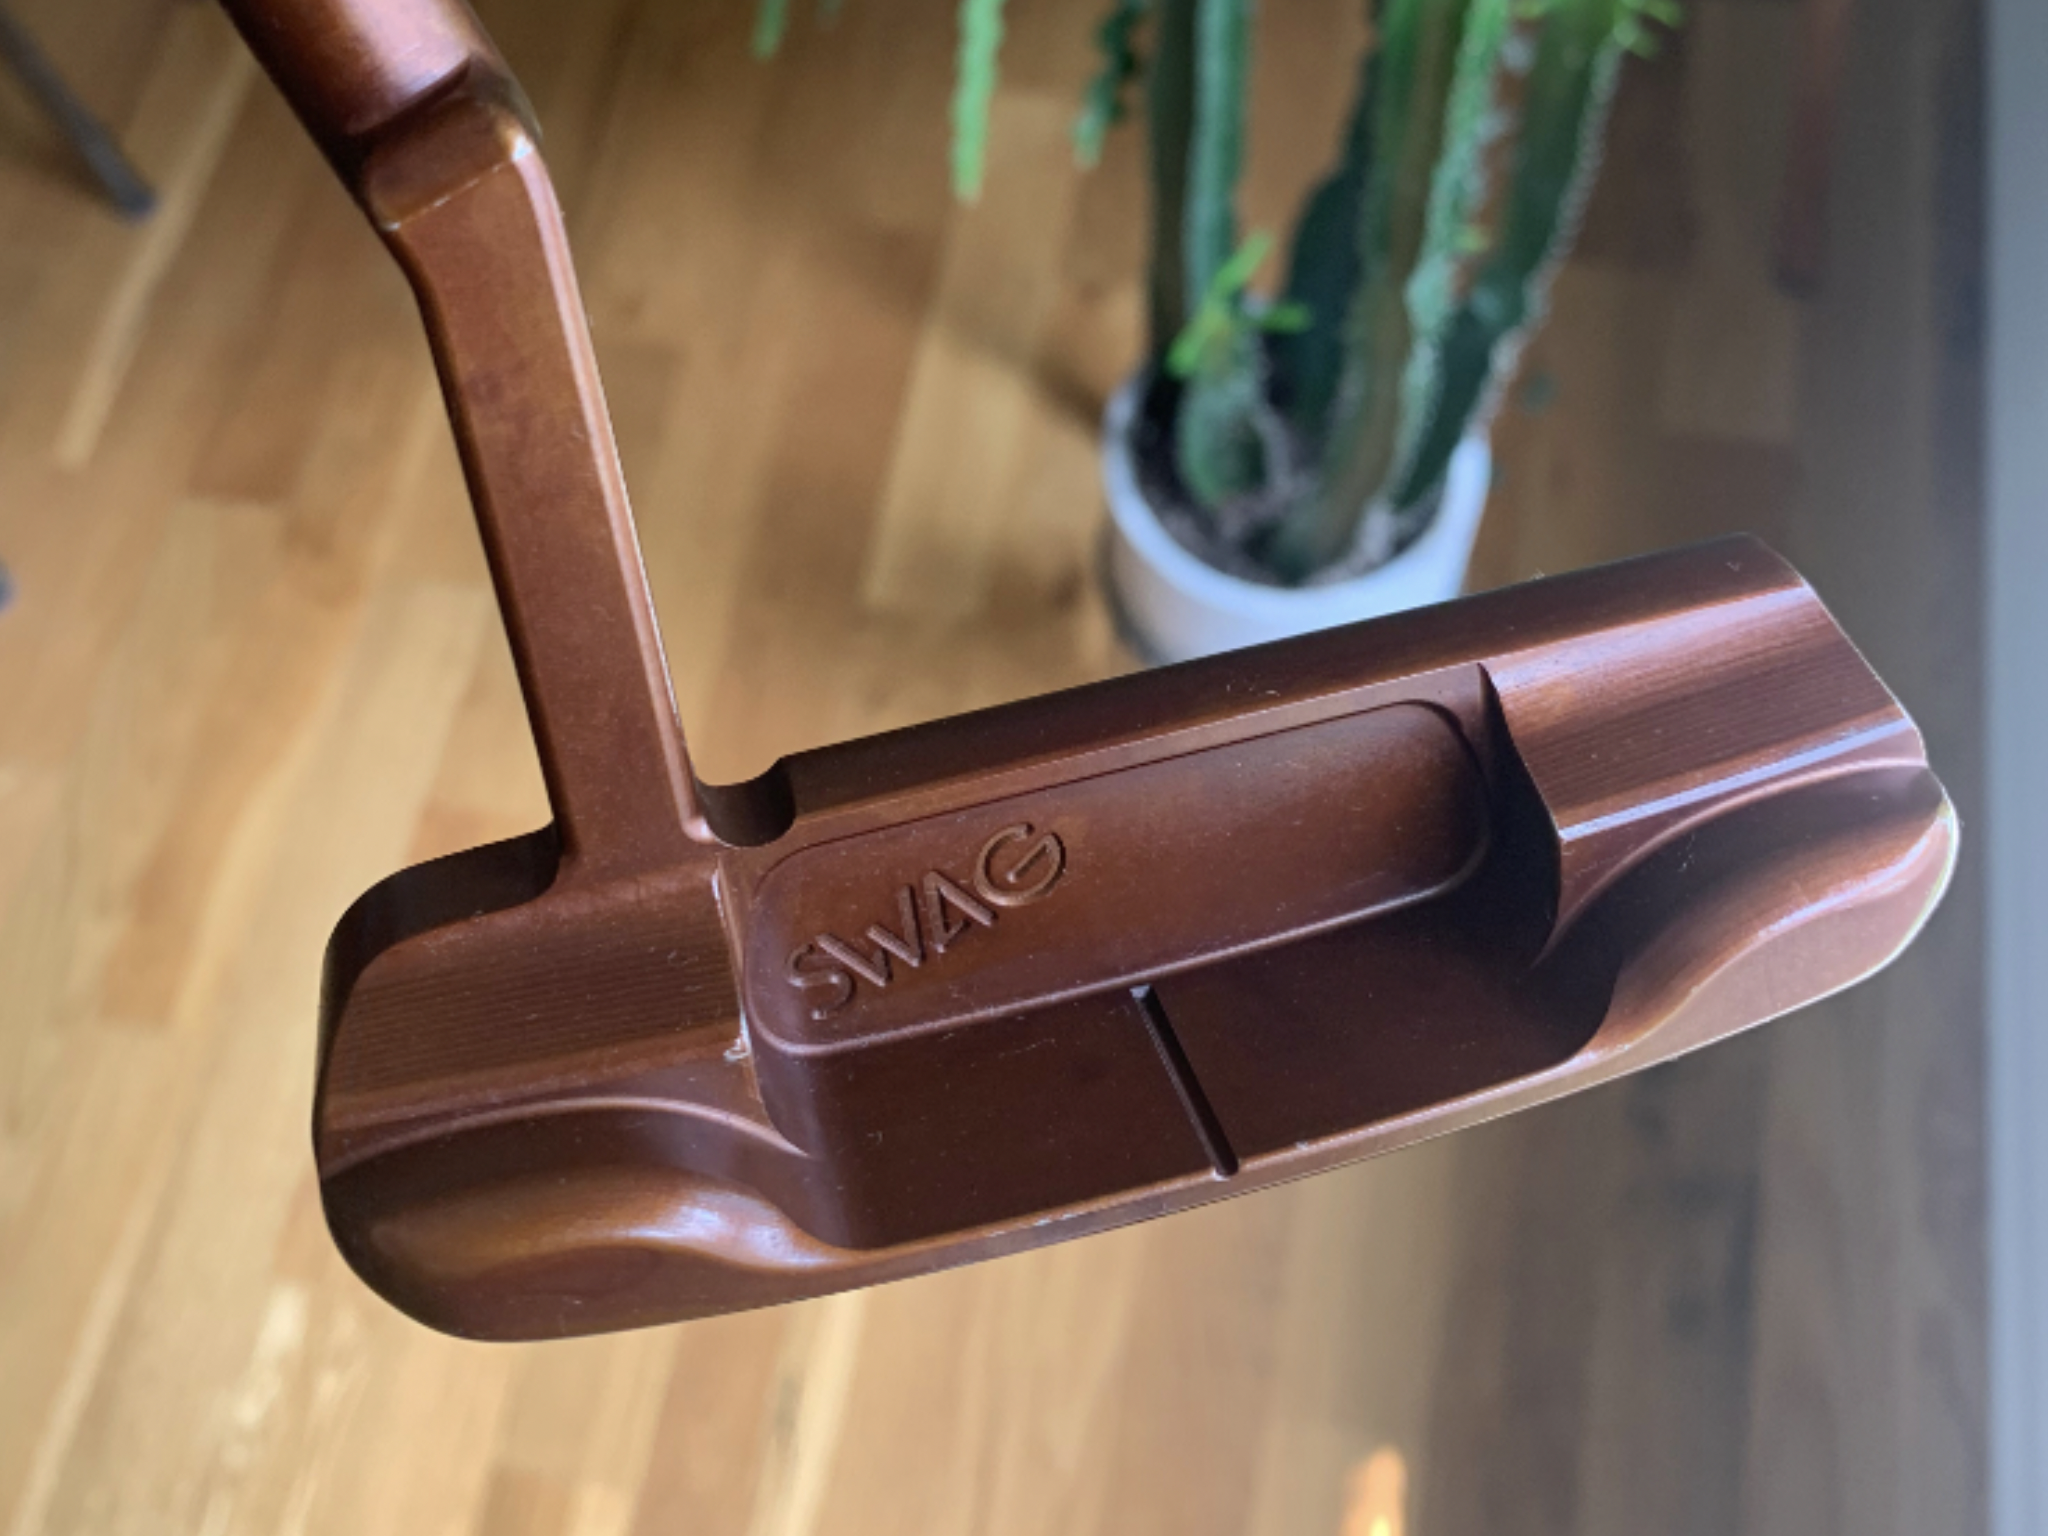 The Golf Garage - Refinished the beautiful @swaggolfco Raw One In our  Rusted finish complete to match the LV headcover and Grip! @golf_mafia is  going to be the envy on the green! #